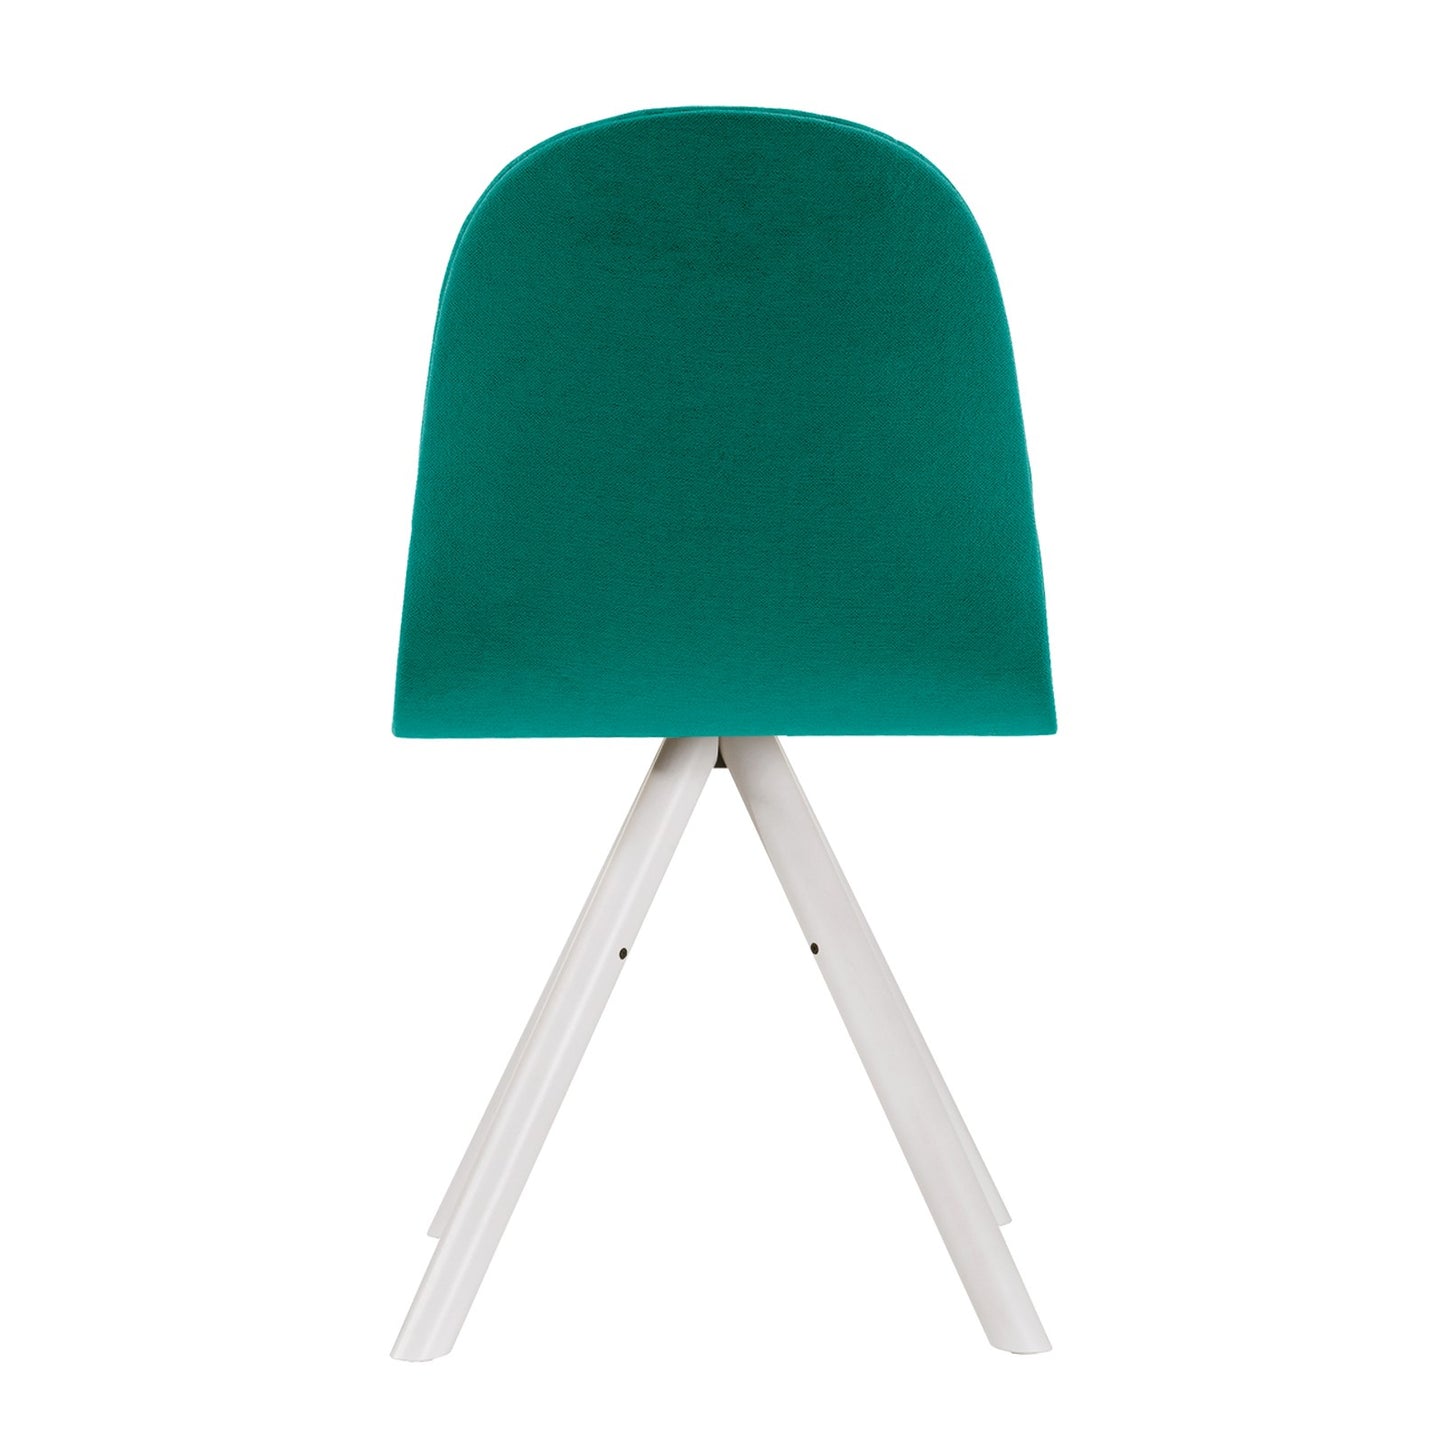 Chair Mannequin 01 white - Turquoise